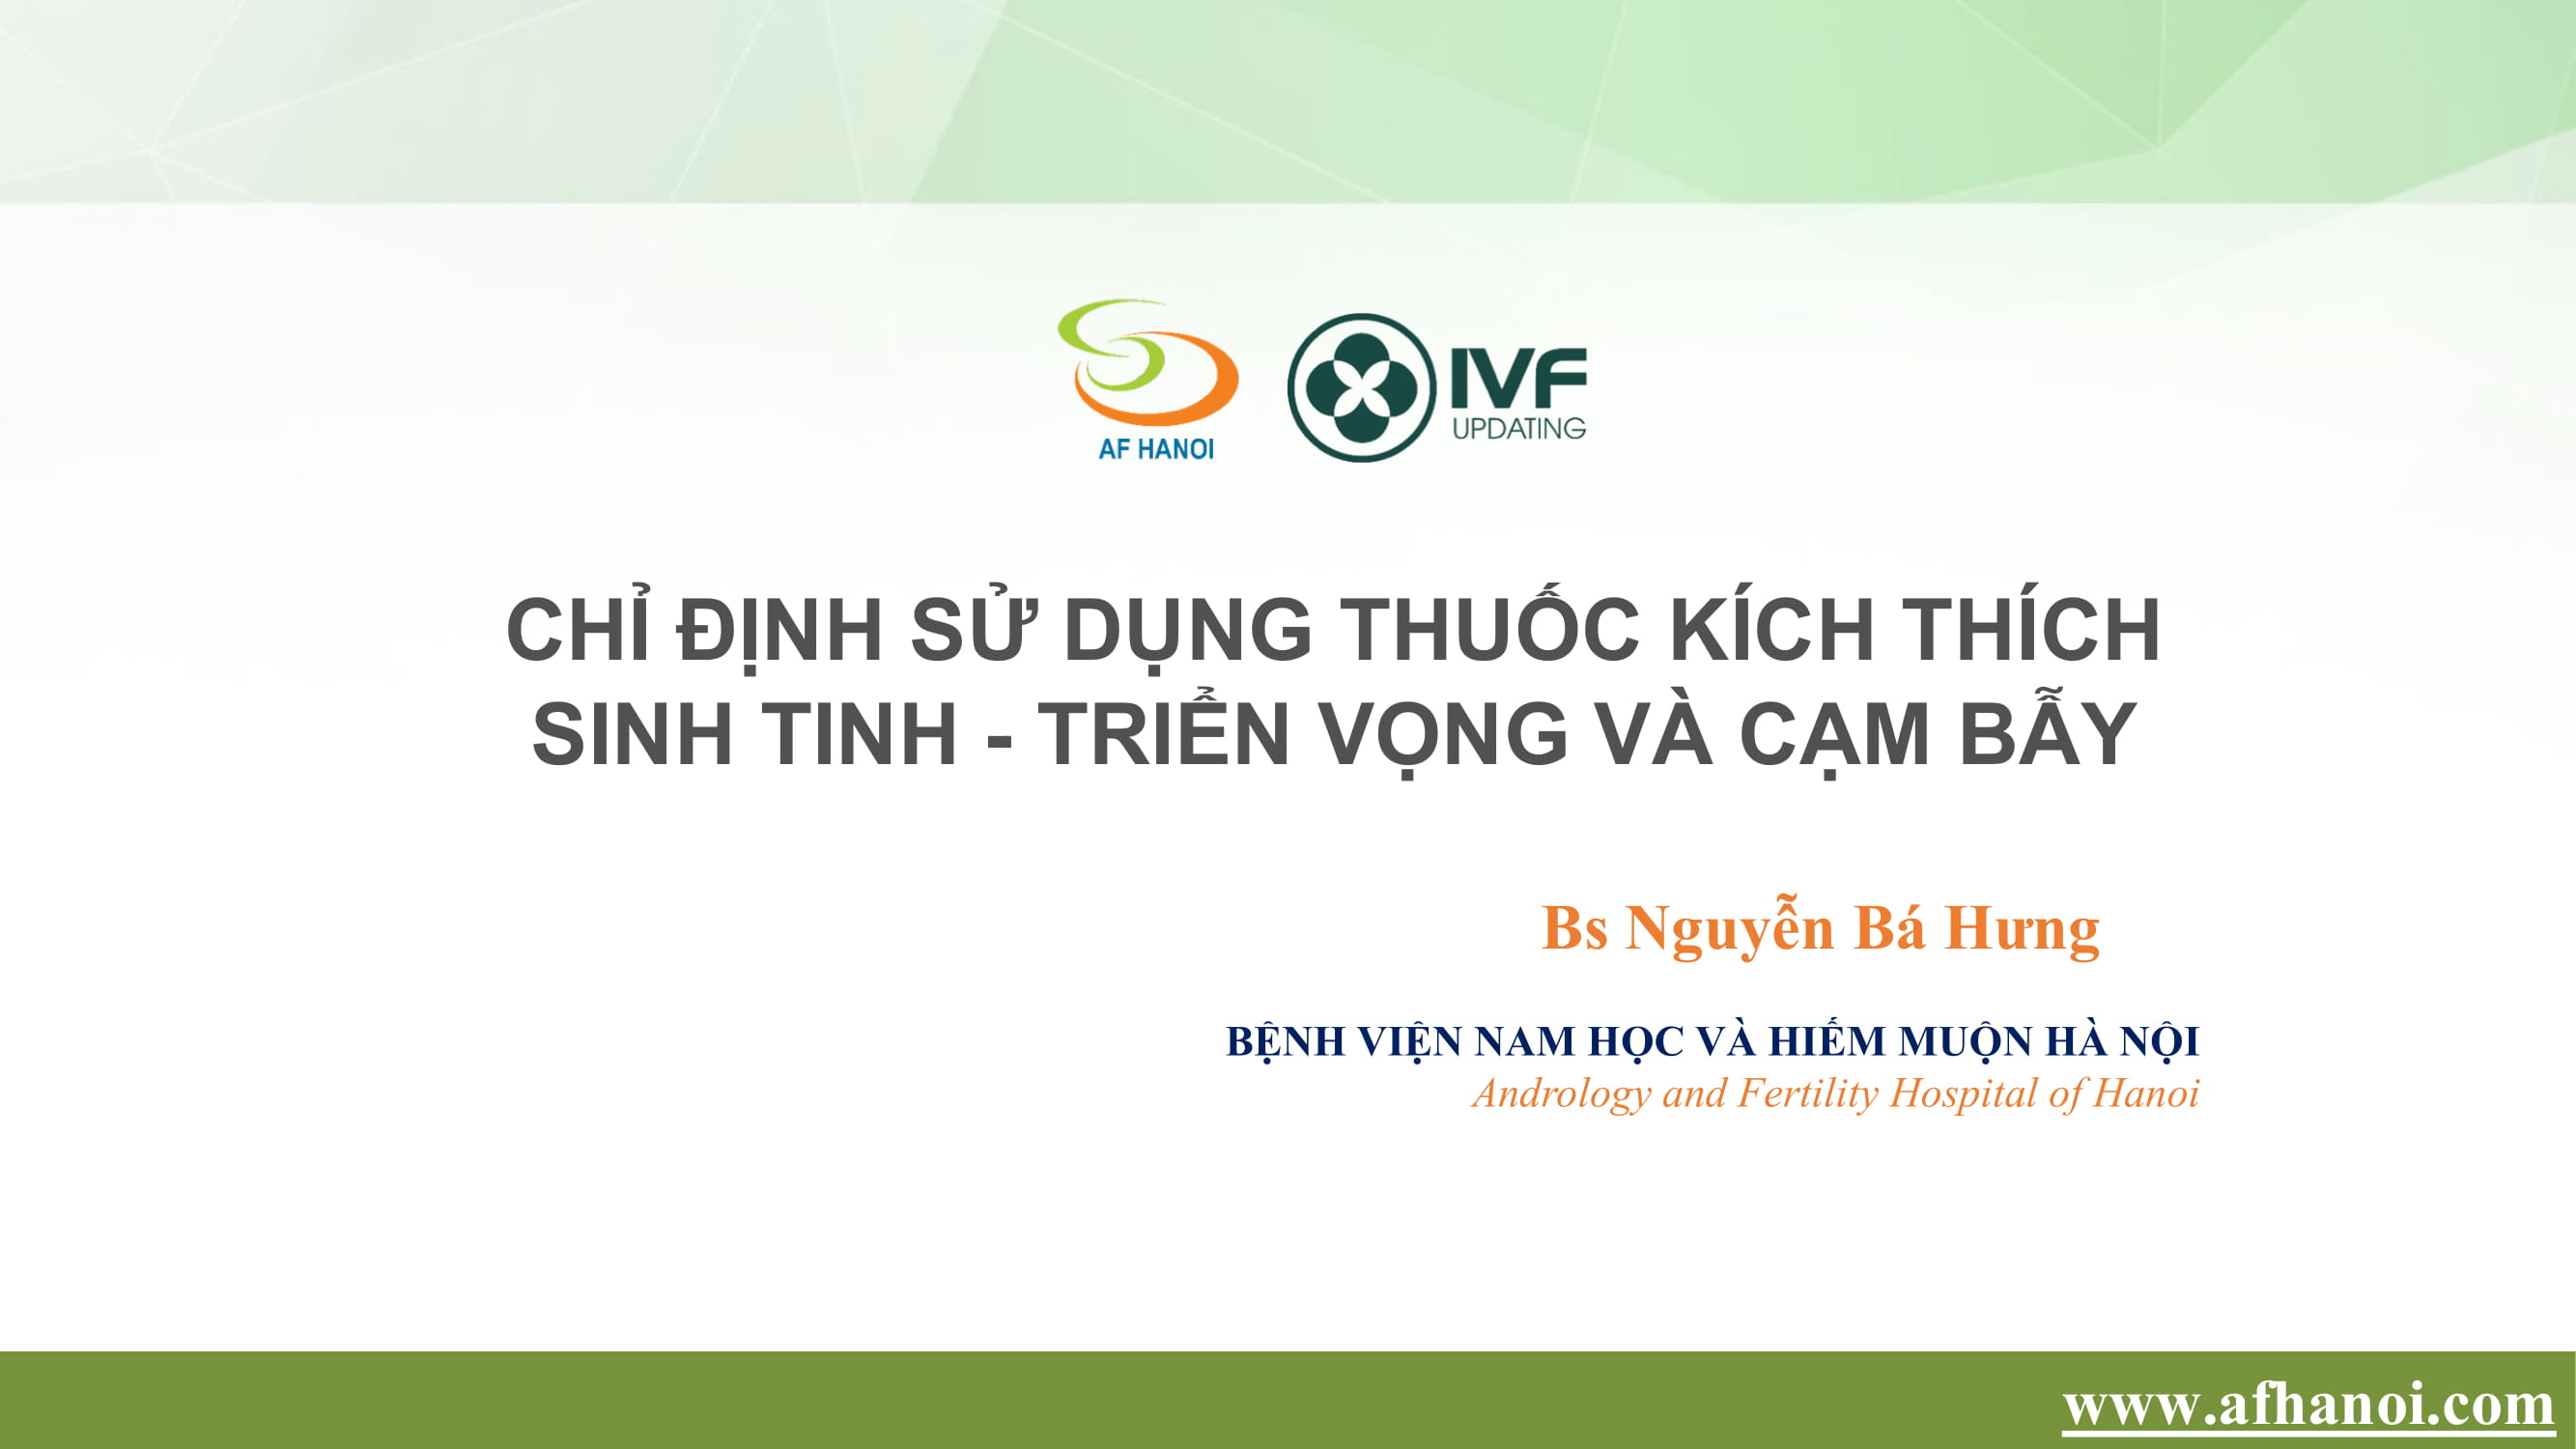 BS Nguyen Ba Hung - Chi dinh thuoc kich thich sinh tinh1-01